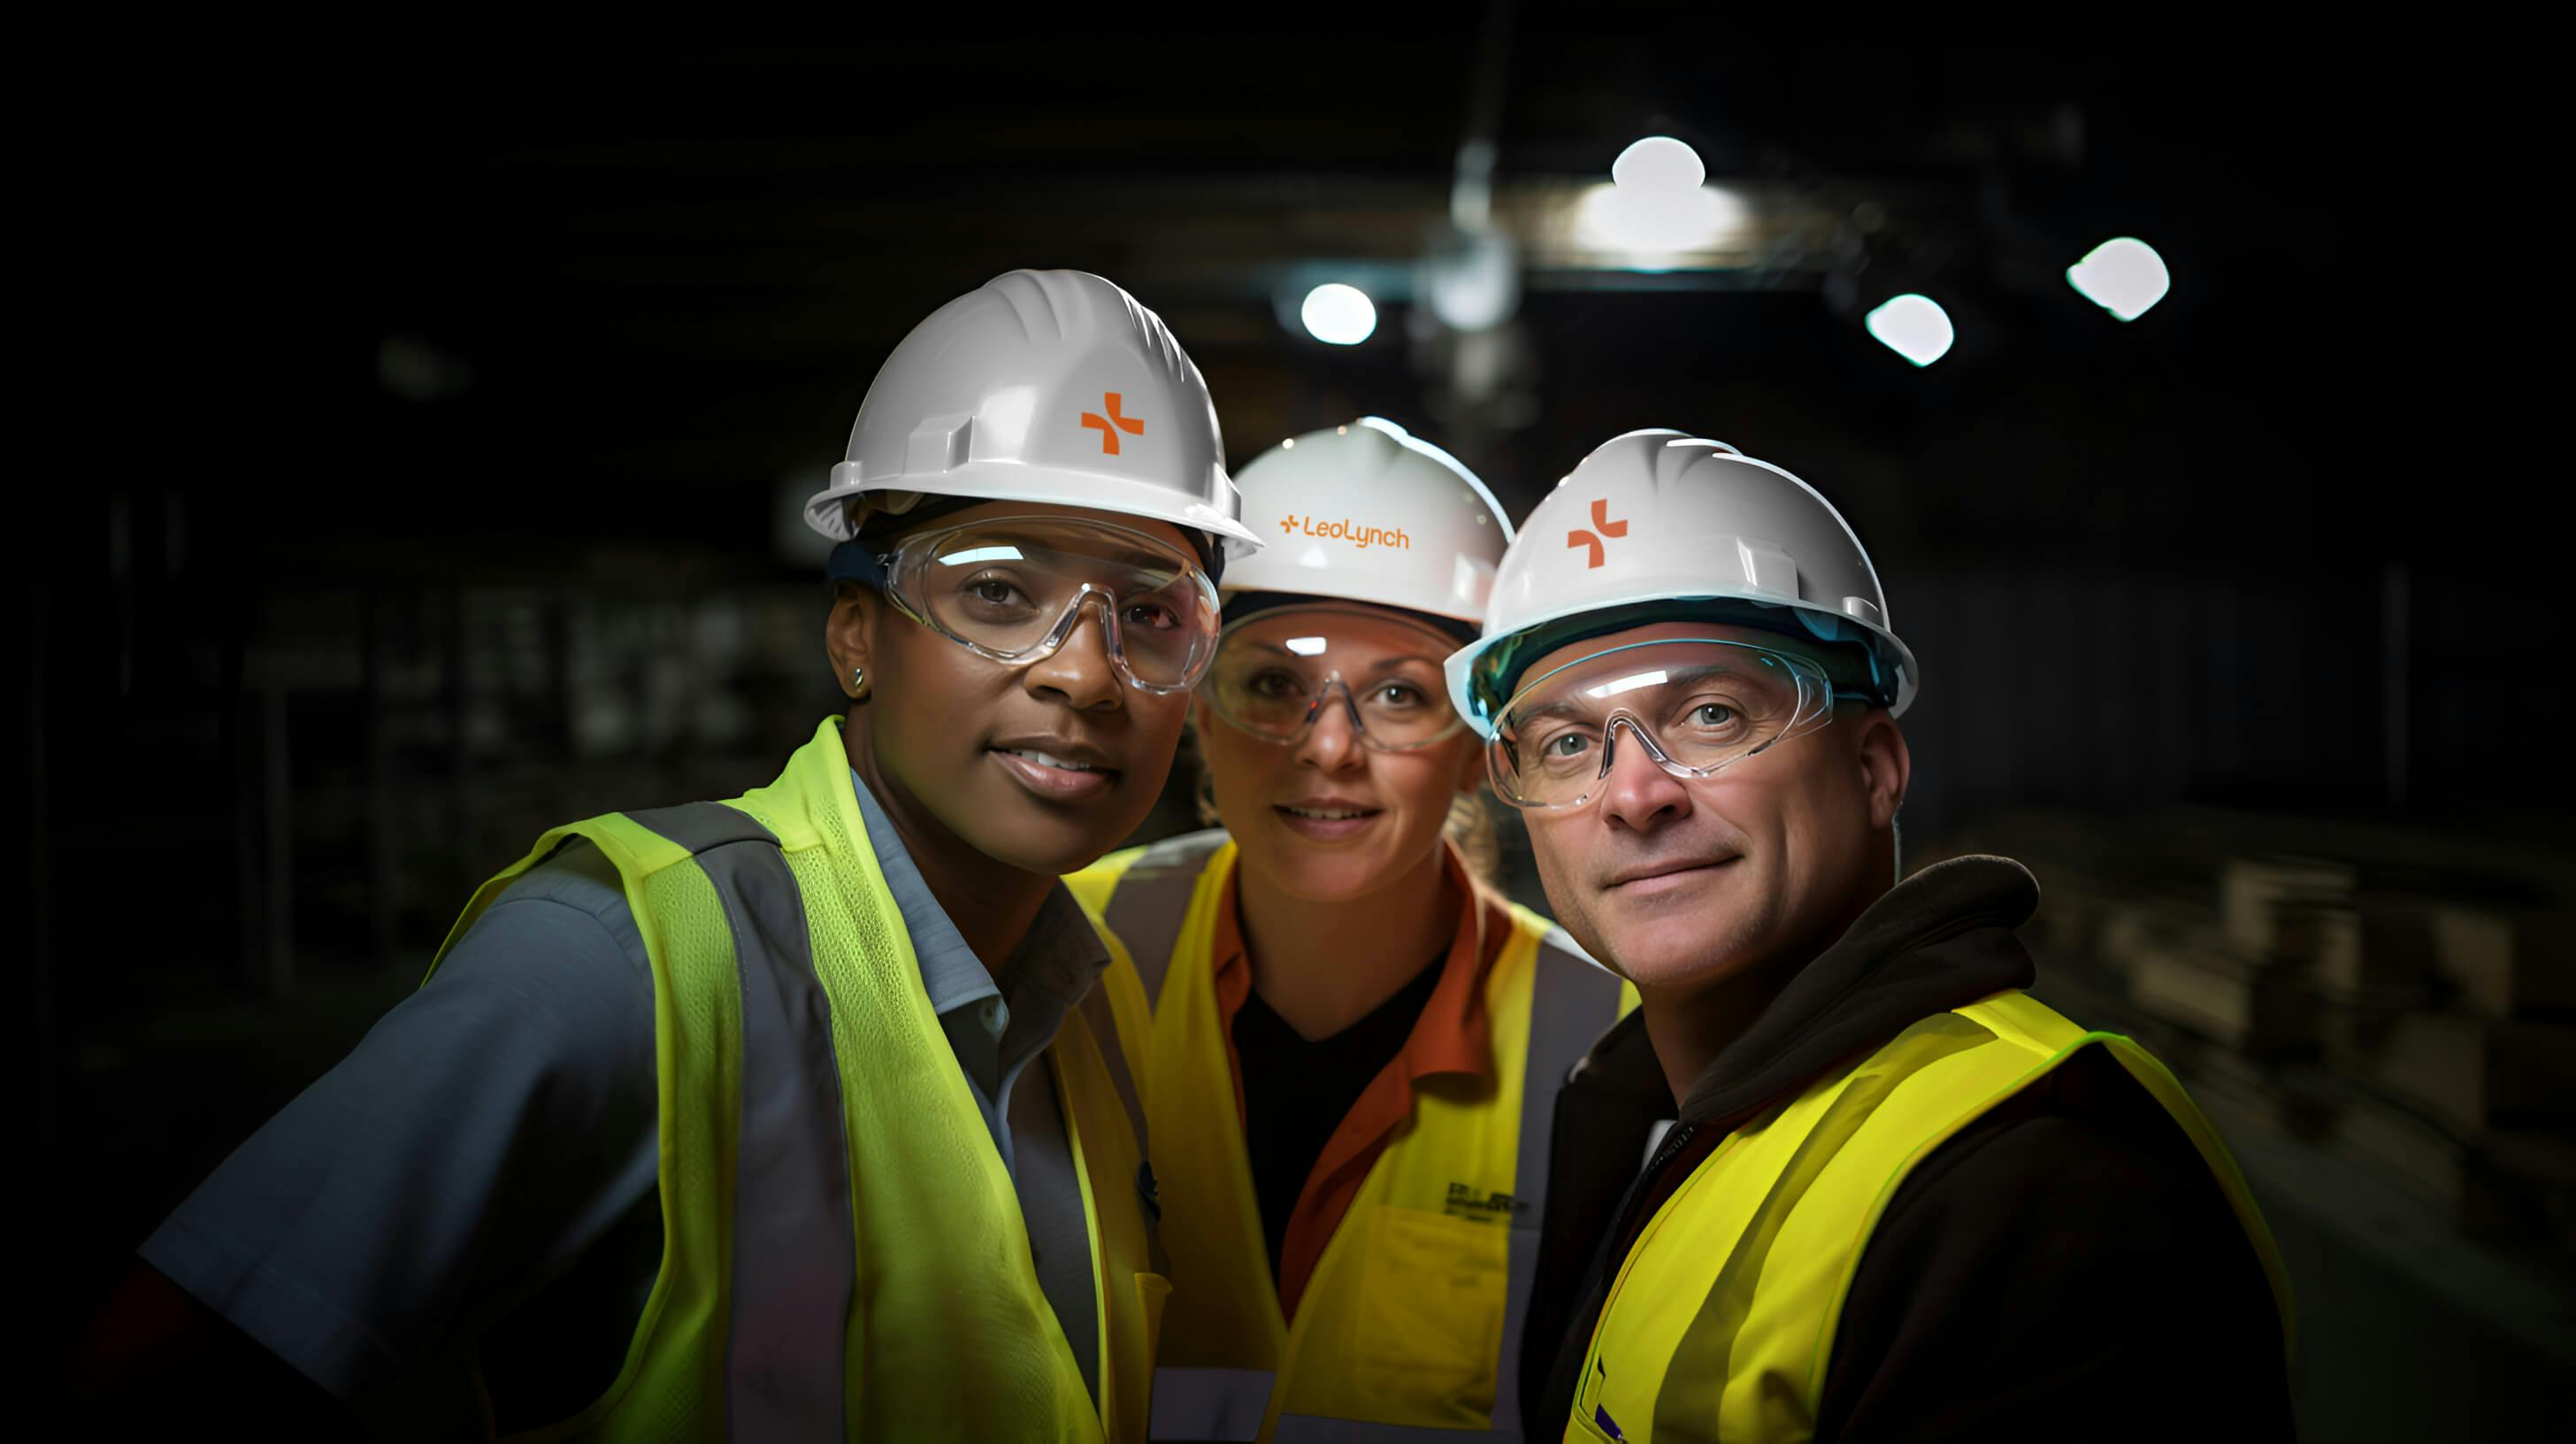 3 colleagues, diverse in gender, age and race, on site together. They are wearing Leo Lynch-branded 5 point PPE